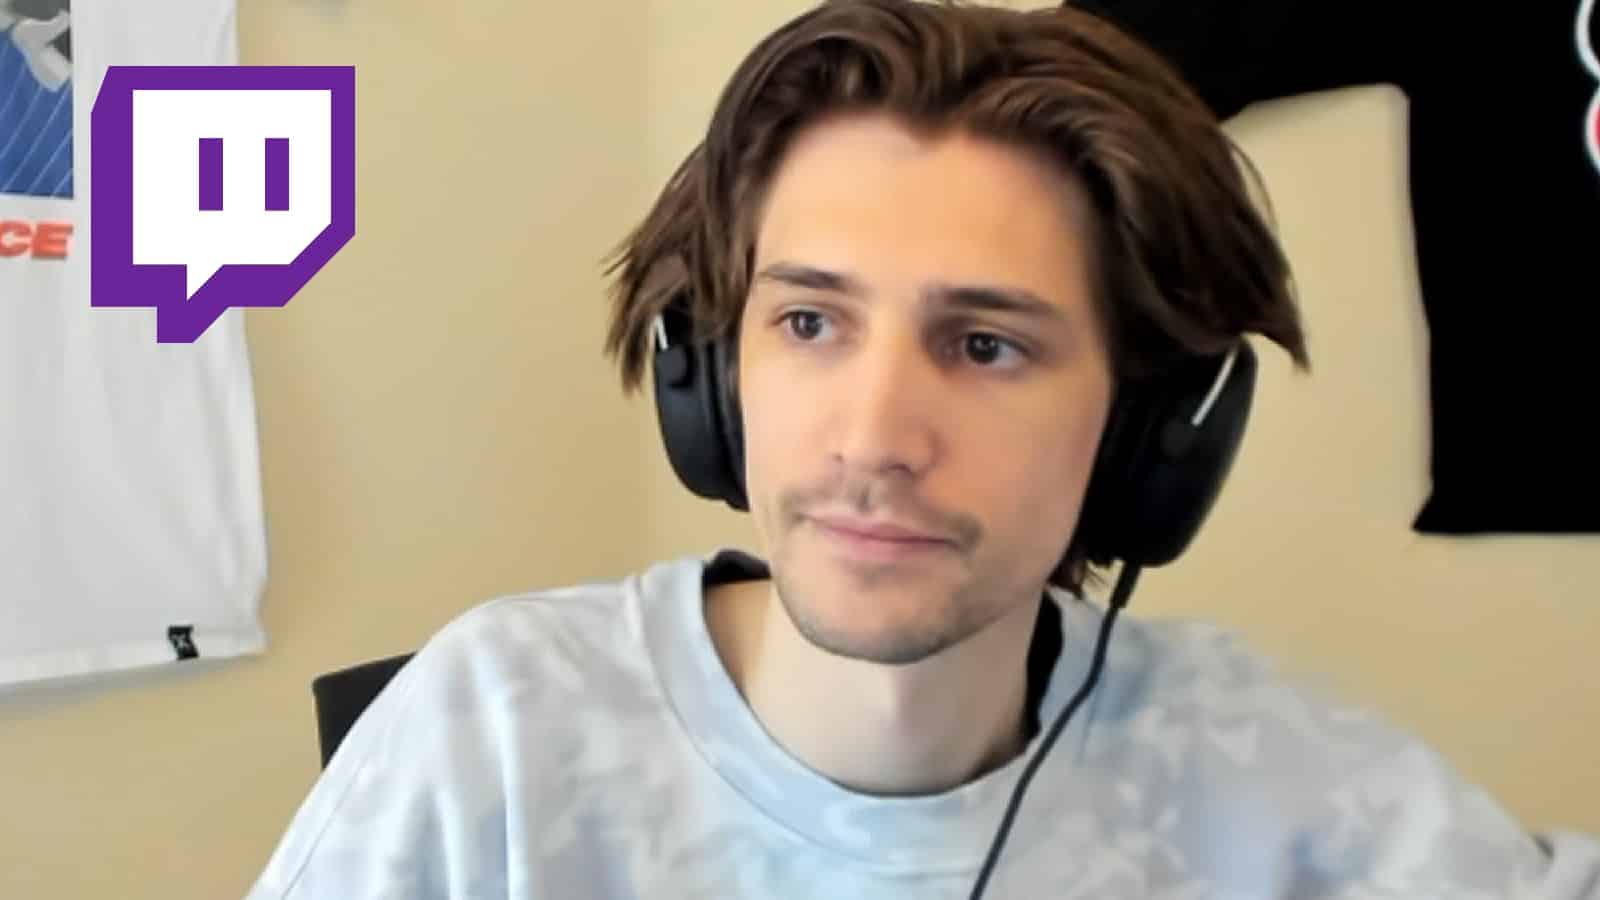 xqc streaming on Twitch